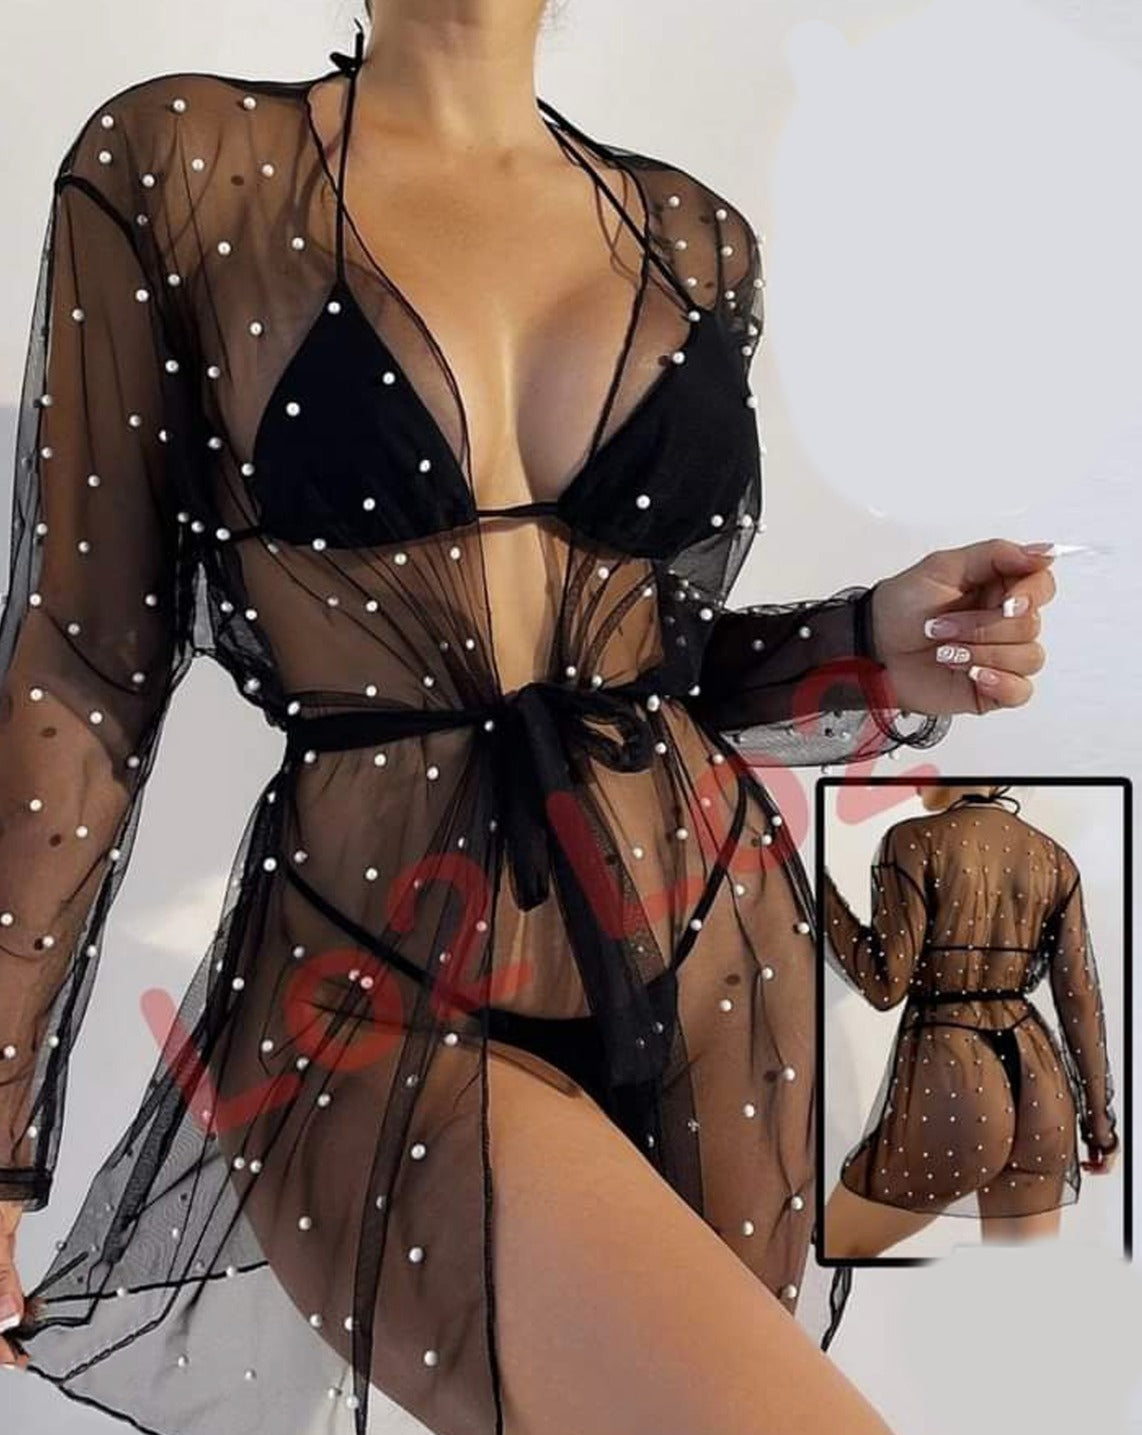 Lingerie pieces made of Lycra and a robe made of chiffon with pearl embroidery